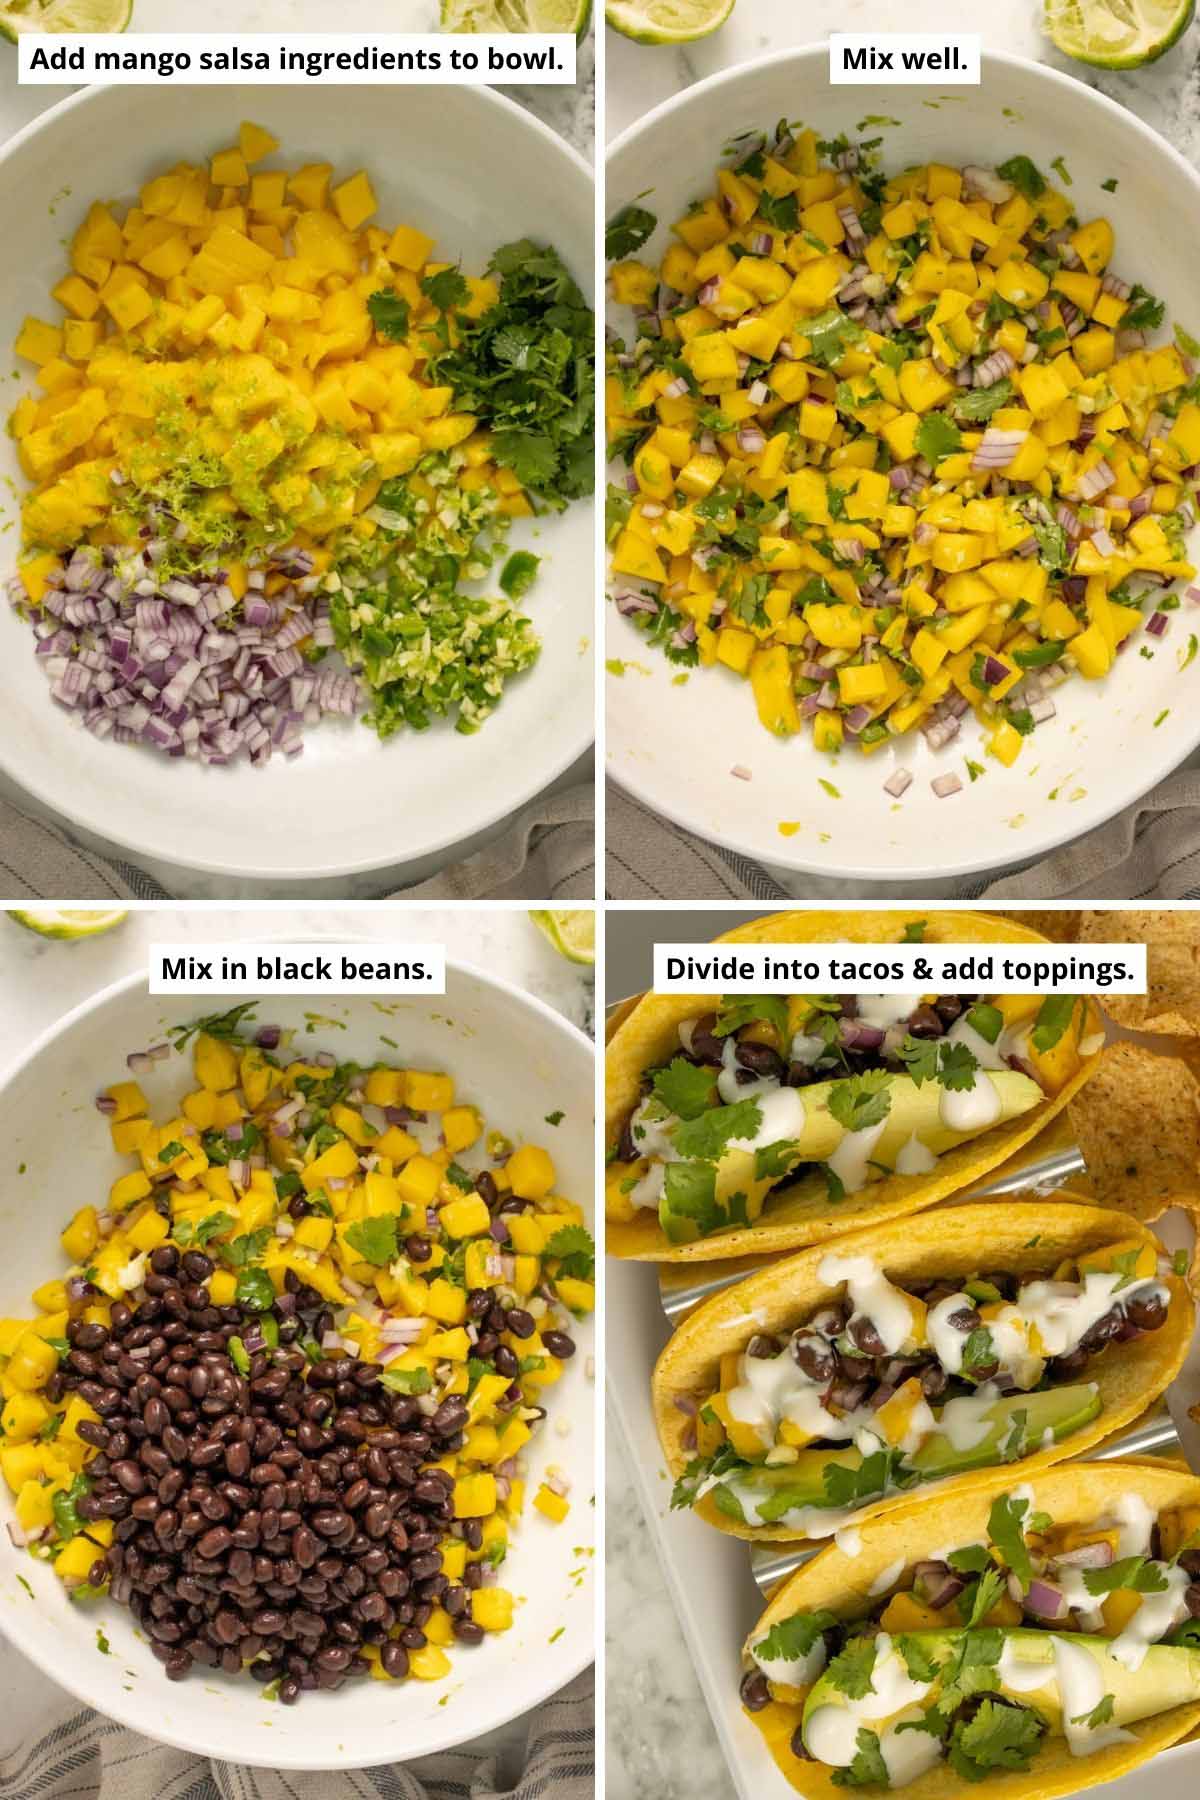 image collage showing the mango salsa ingredients before and after mixing, adding the beans to the mixture, and the finished mango tacos, ready to serve